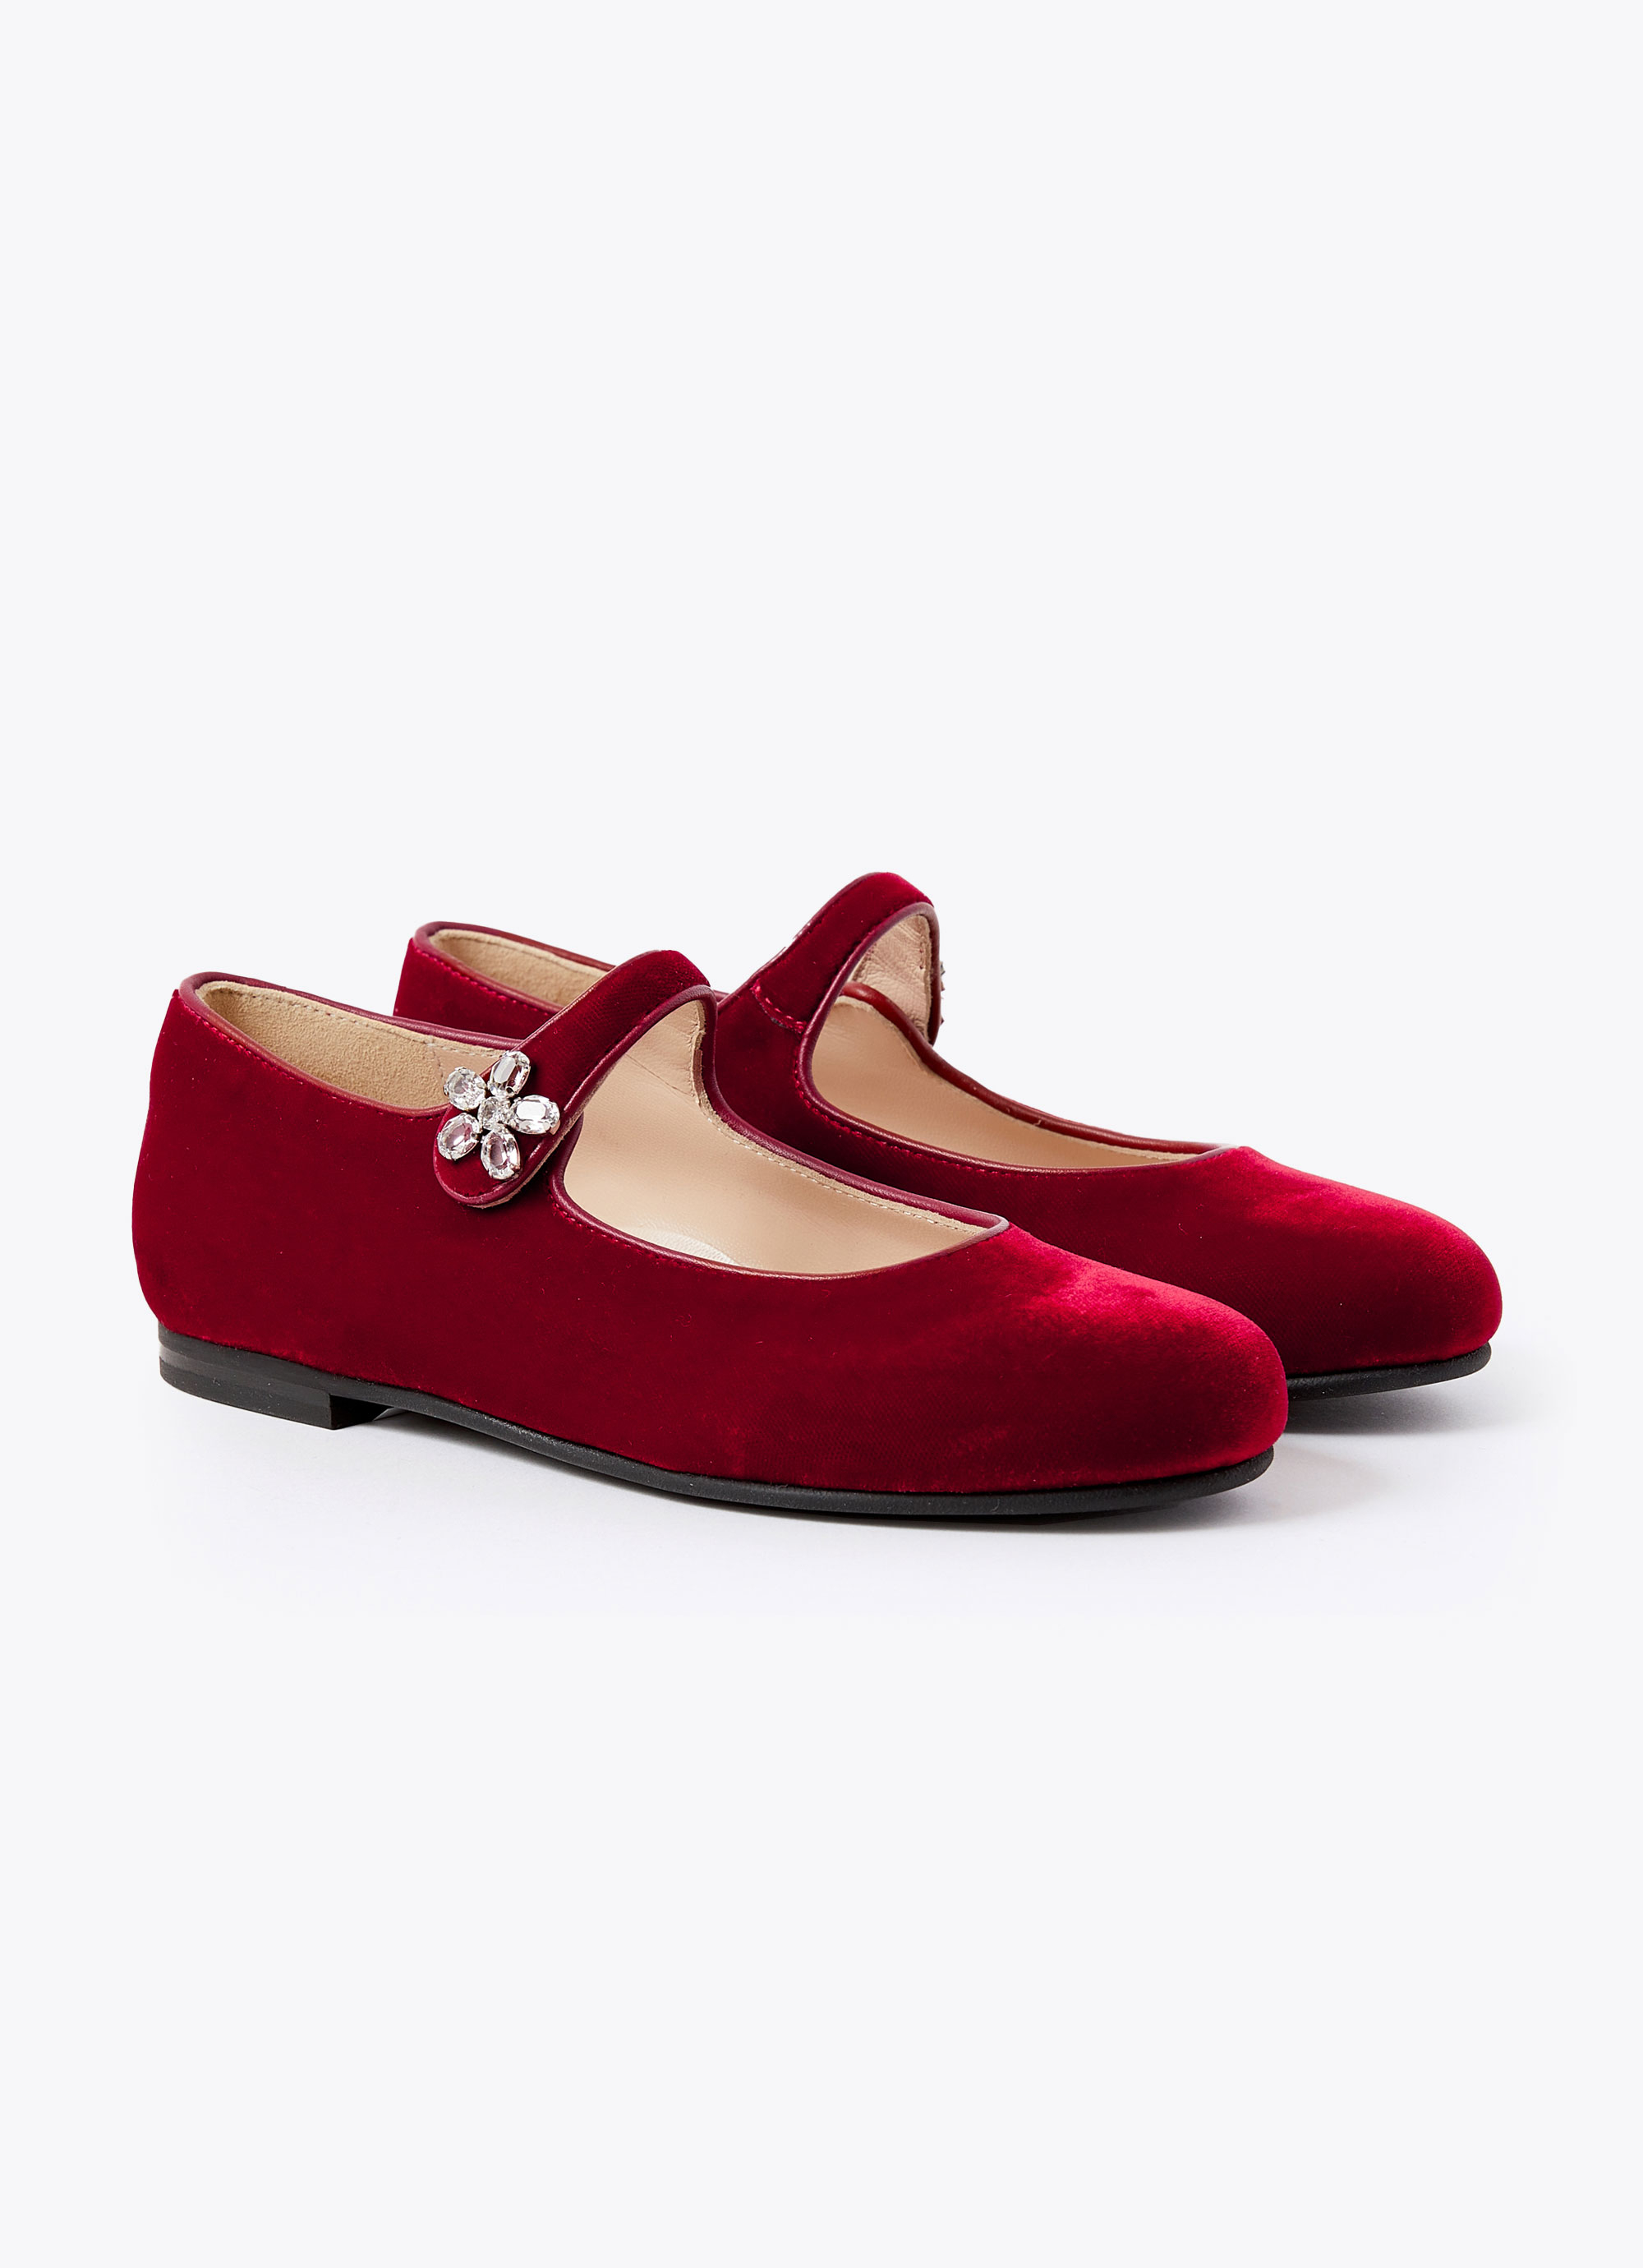 Red velvet ballet flats with crystals - Shoes - Il Gufo